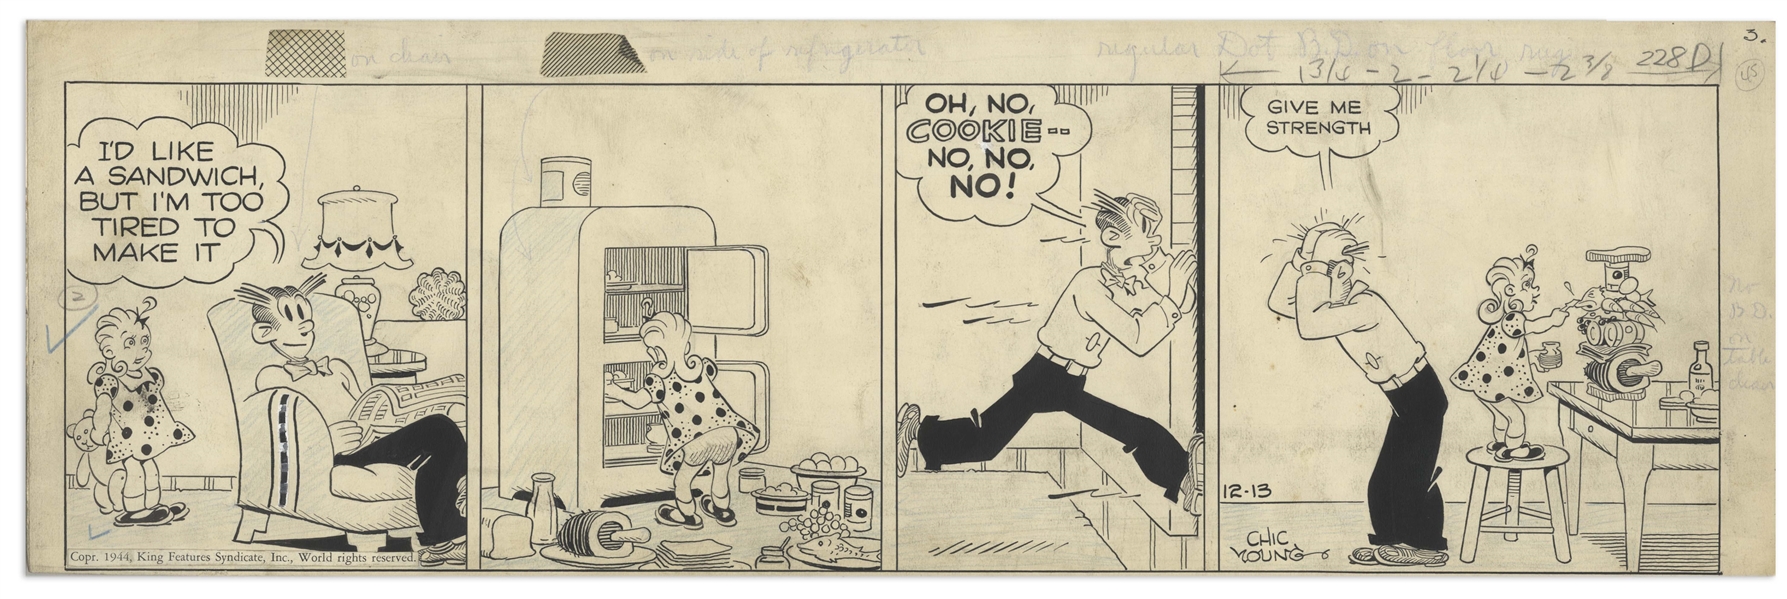 Chic Young Hand-Drawn ''Blondie'' Comic Strip From 1944 Titled Totem Pole Special!